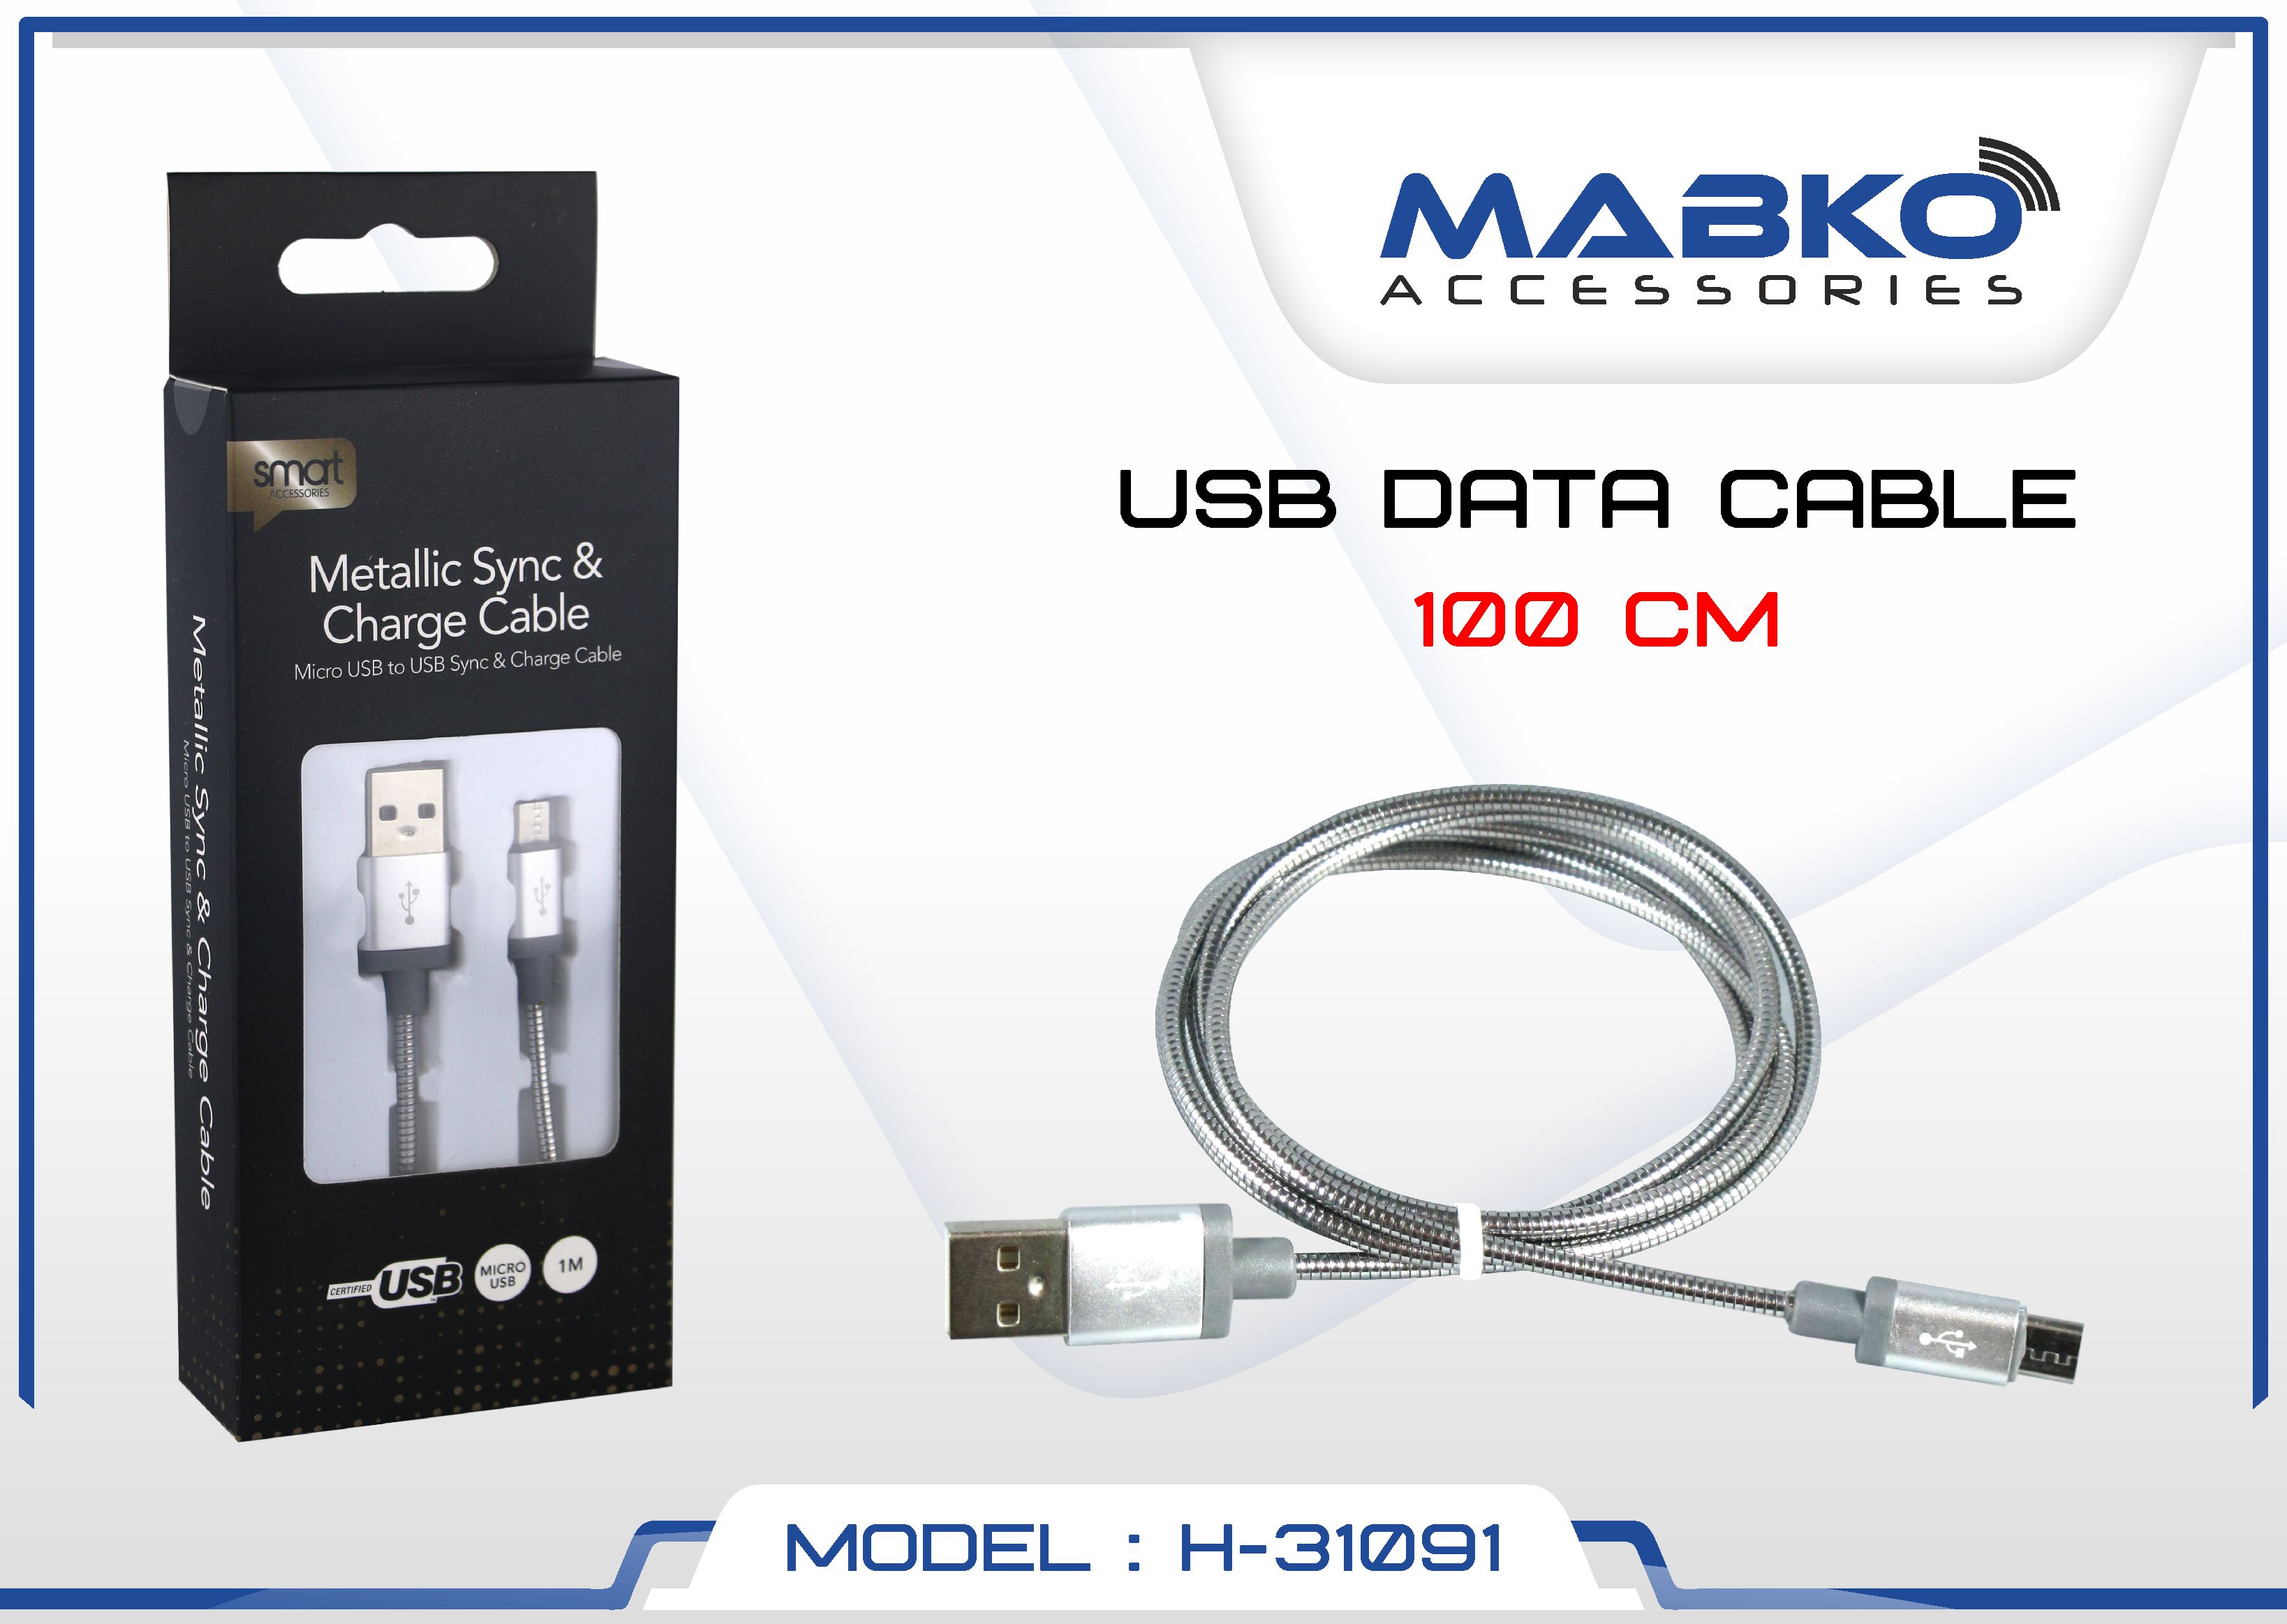 QUICK CHARGER 2 A